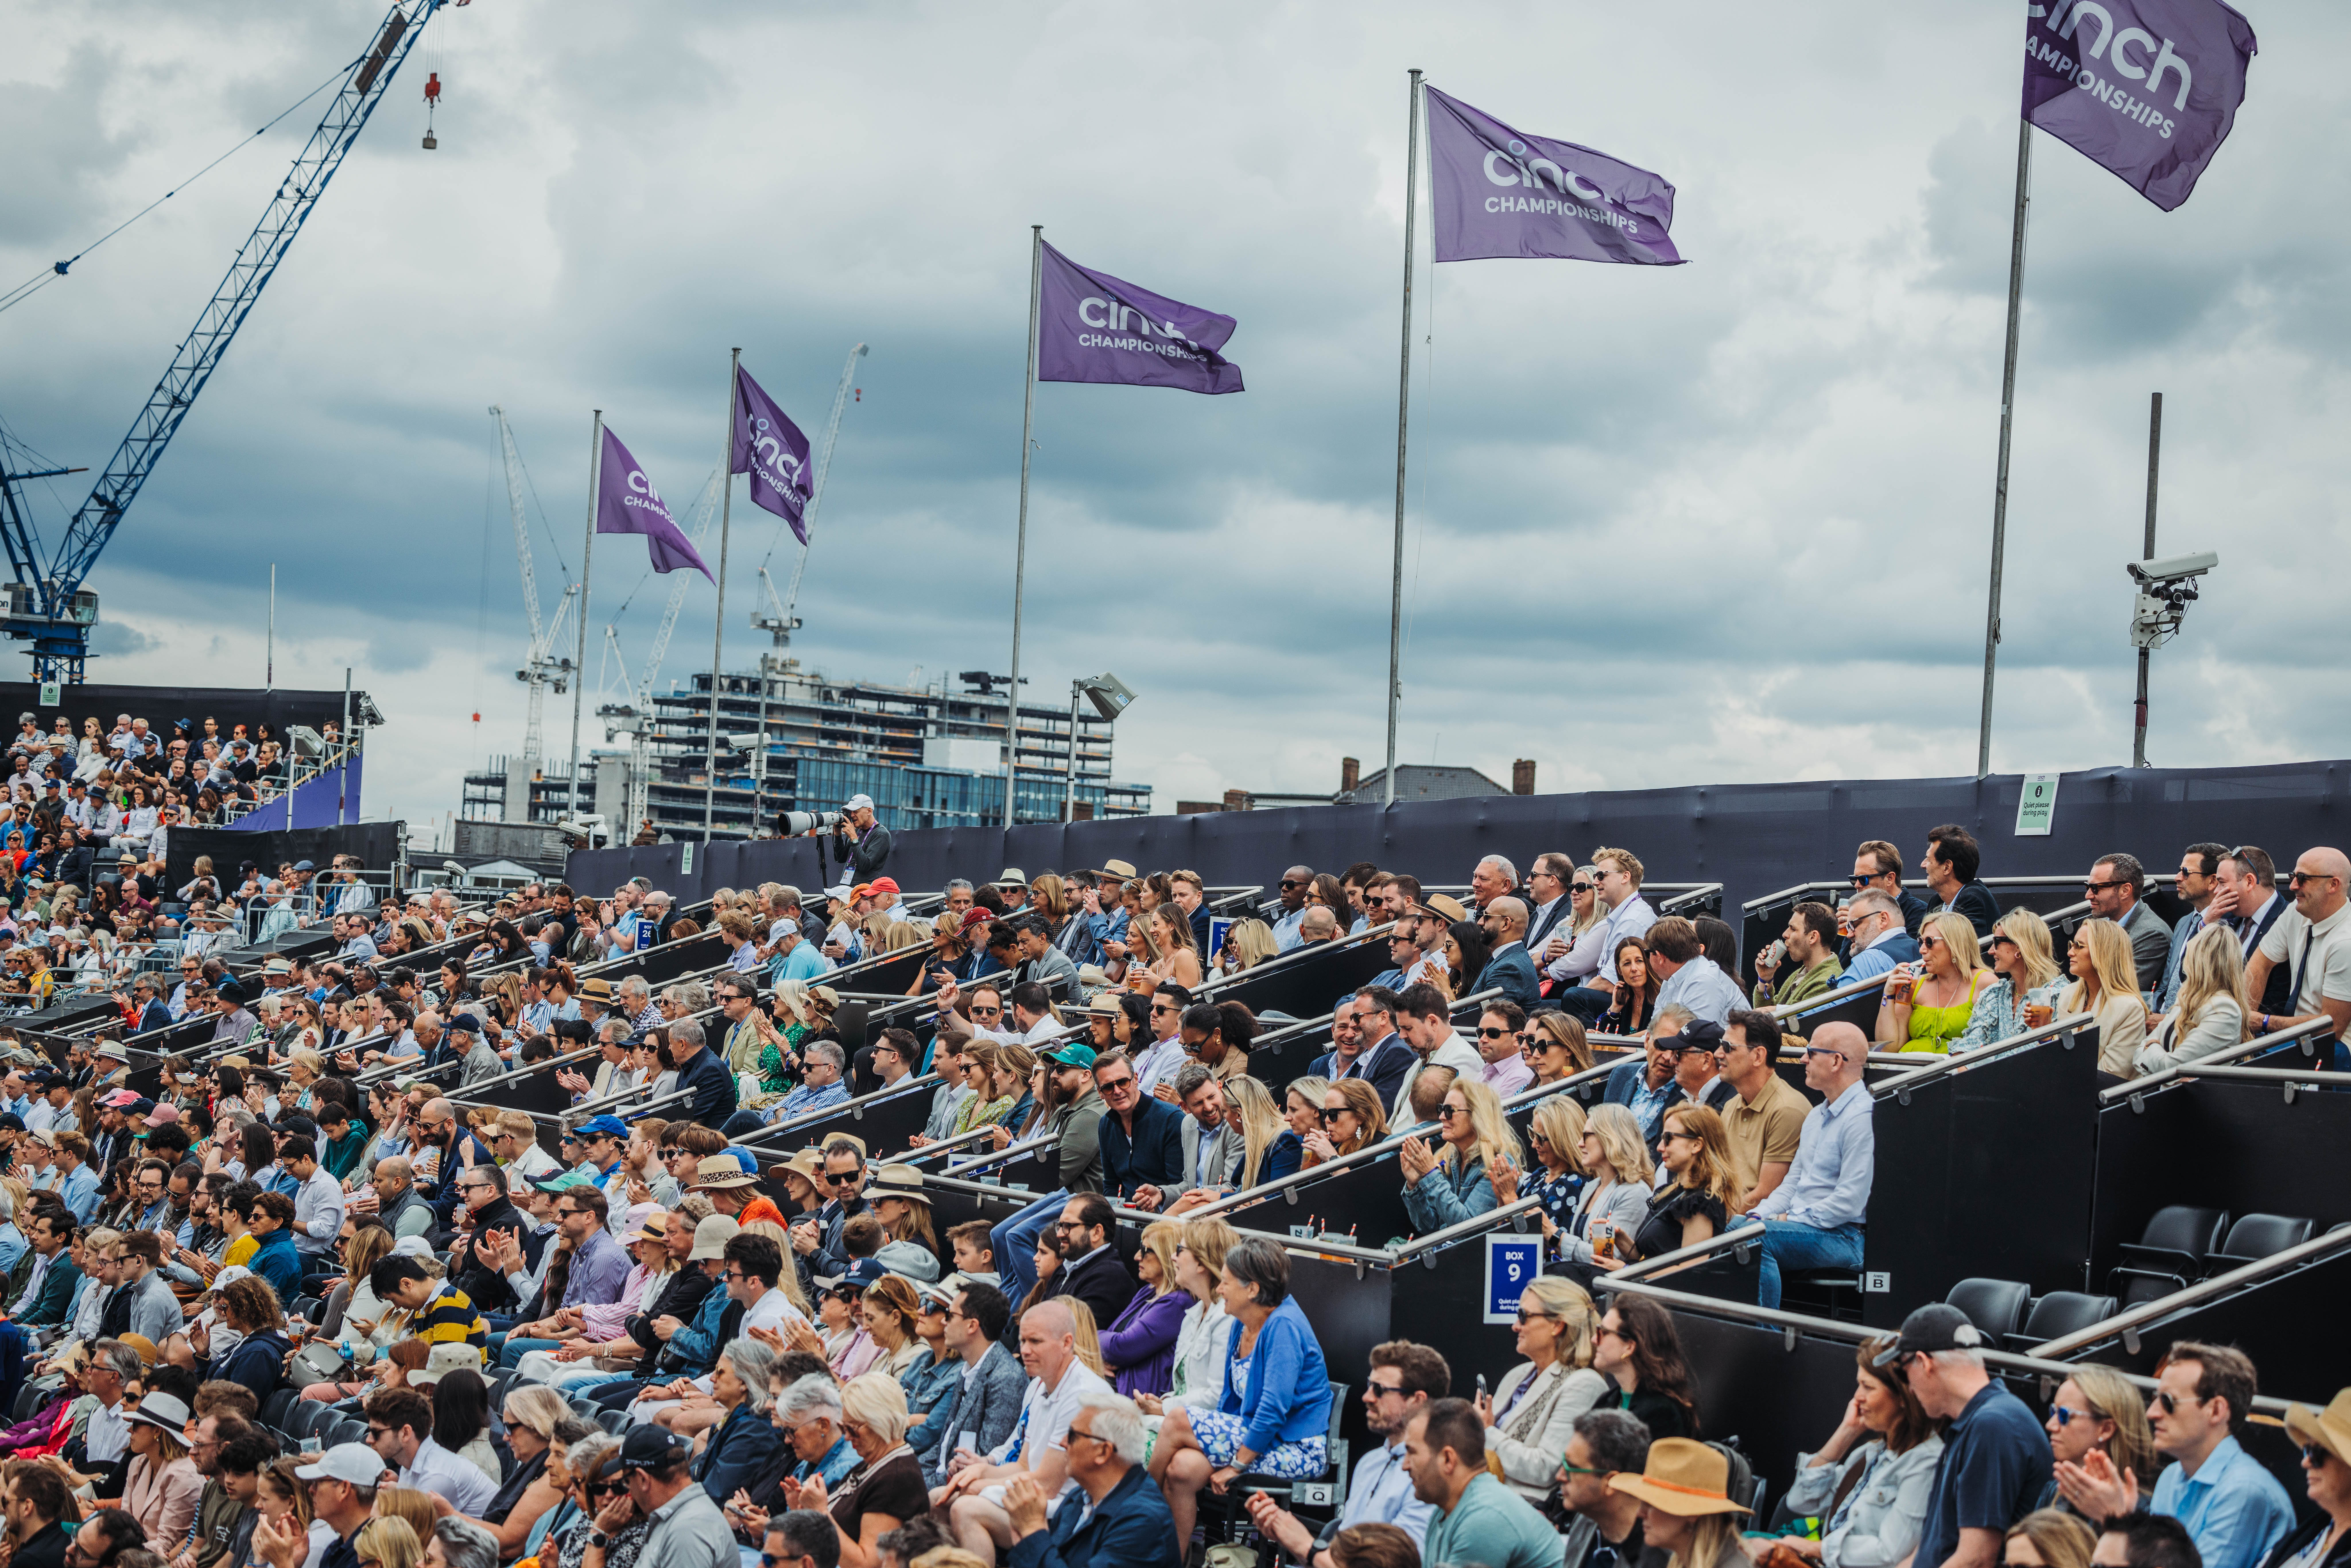 New Name, New Era: The 2025 LTA Championships at Queen's Club